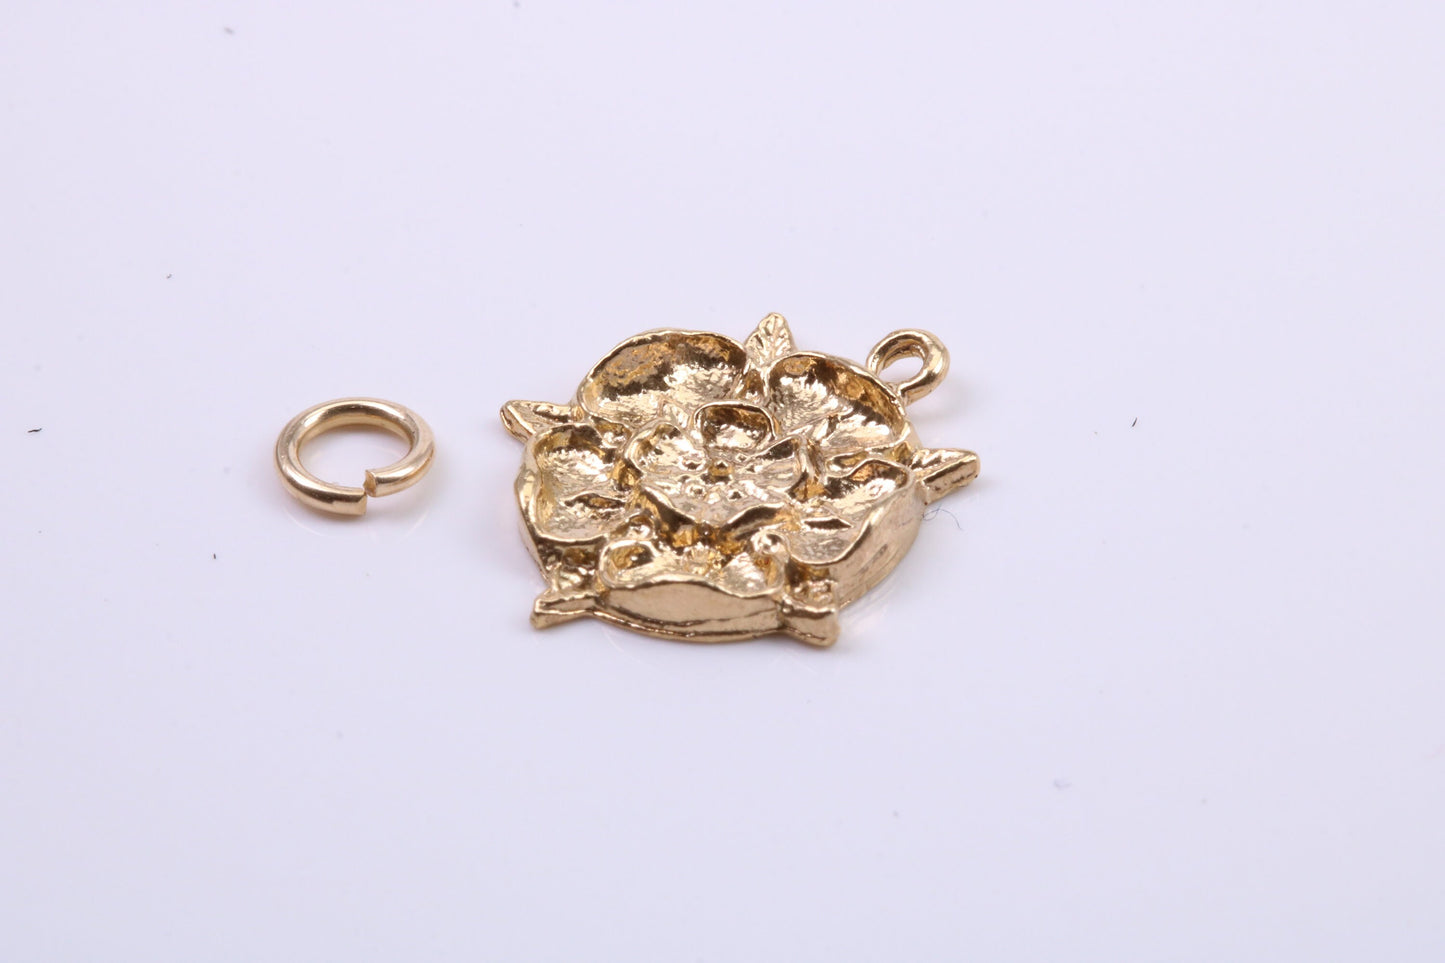 Tudor Rose Charm, Traditional Charm, Made from Solid 9ct Yellow Gold, British Hallmarked, Complete with Attachment Link